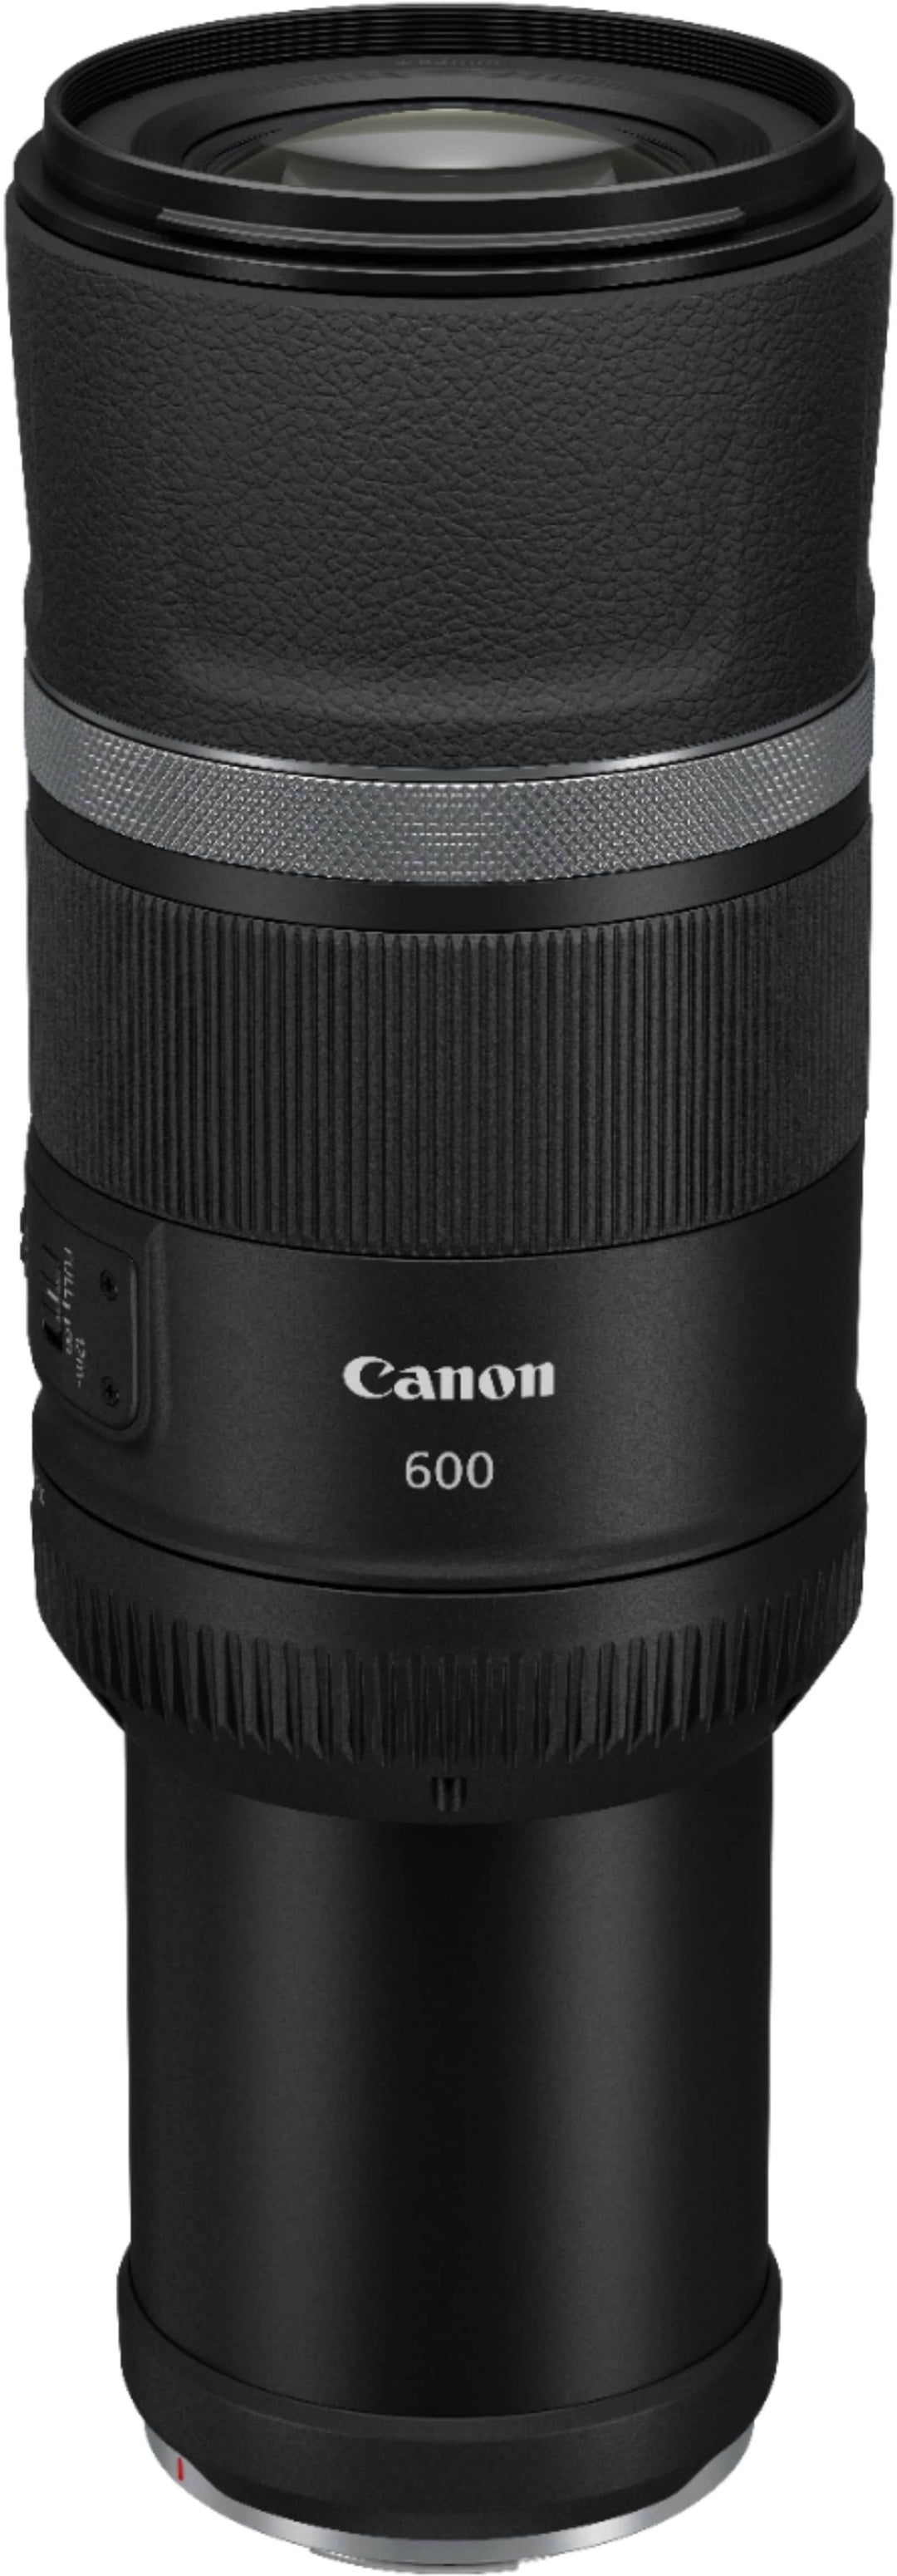 Canon - RF 600mm f/11 IS STM Telephoto Lens for EOS R Cameras - Black_4